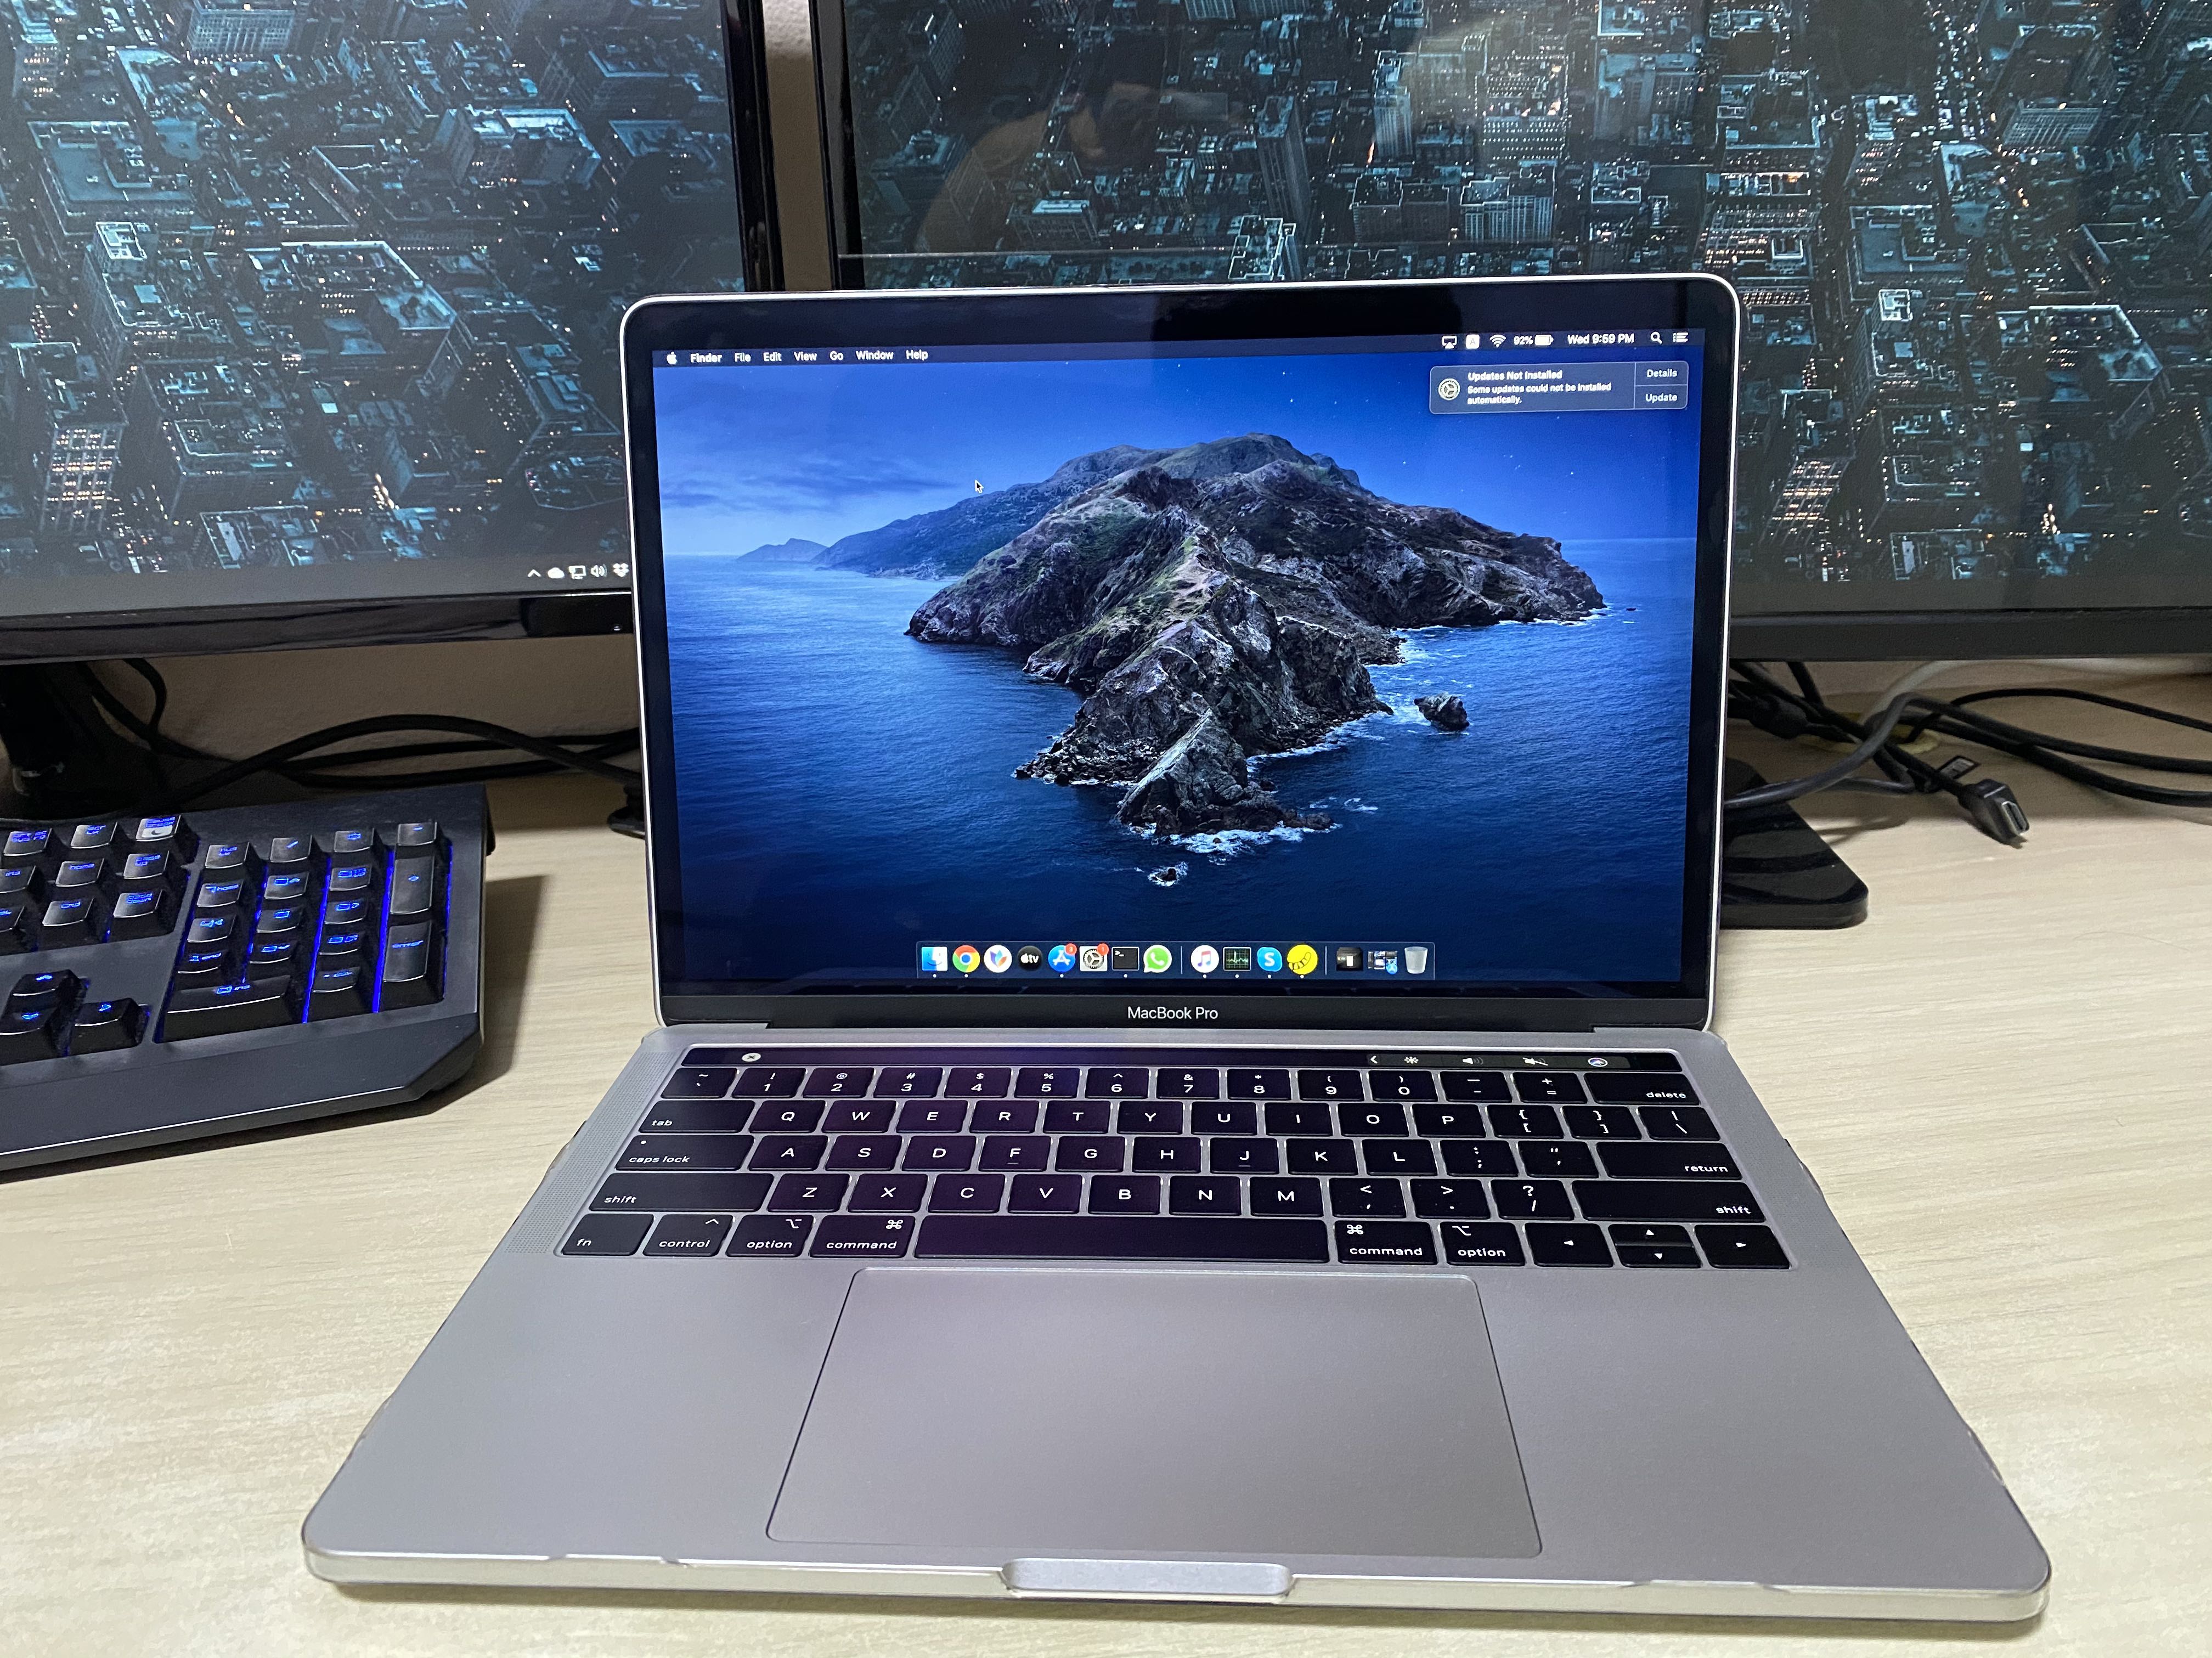 MacBook Pro (13-inch, 2019, two thunderbolt 3 ports), Computers ...